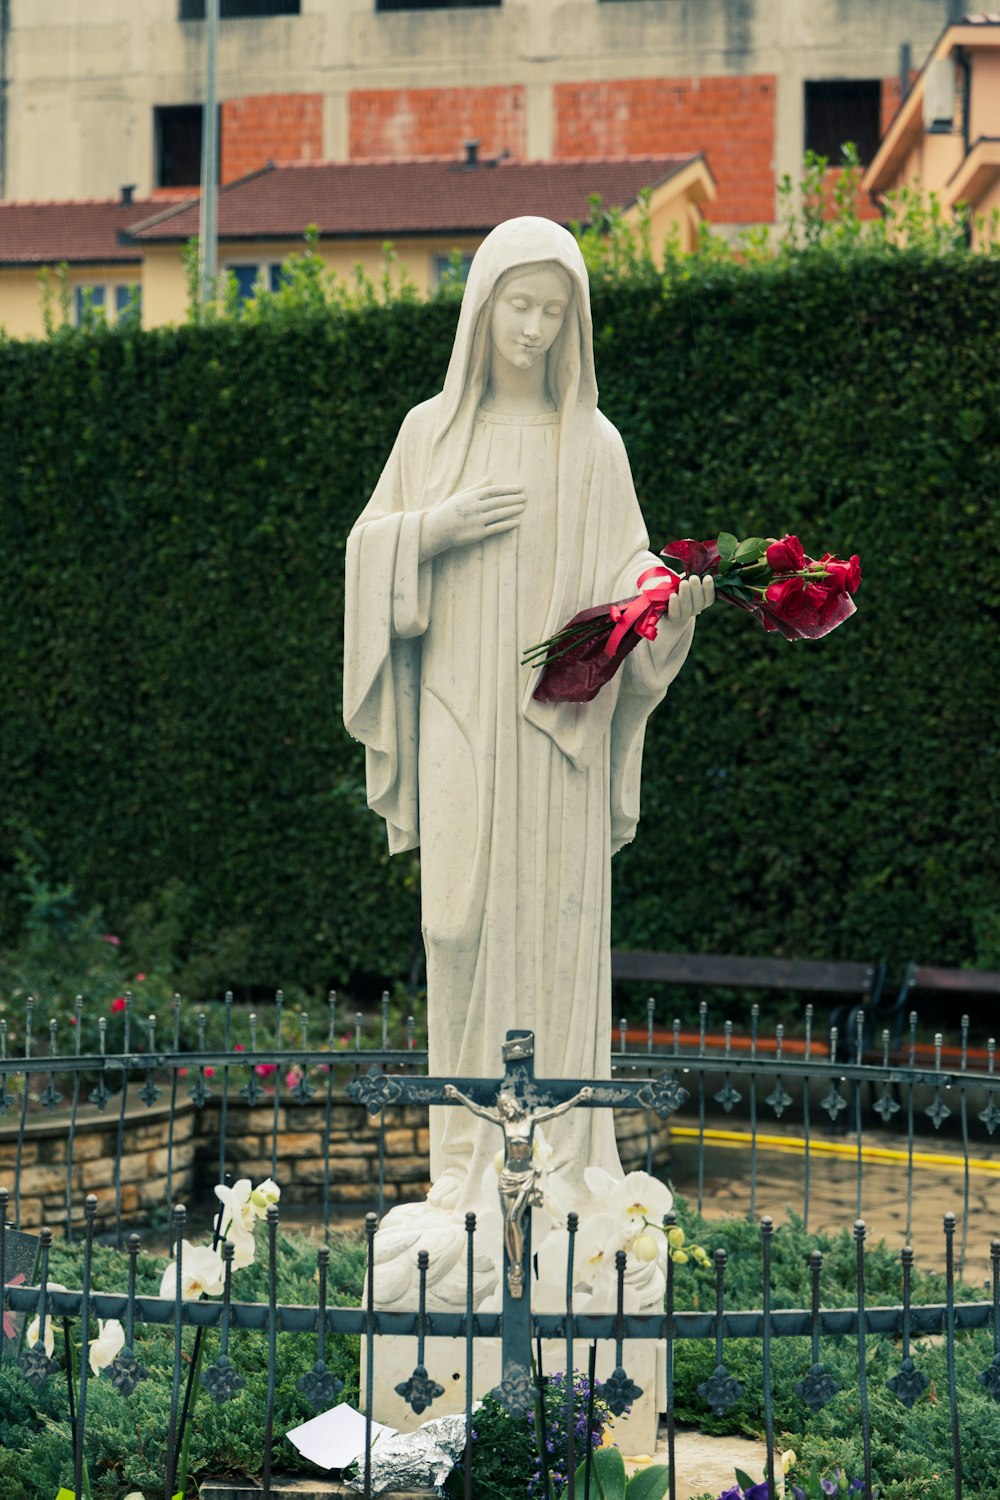 a statue of a person holding flowers